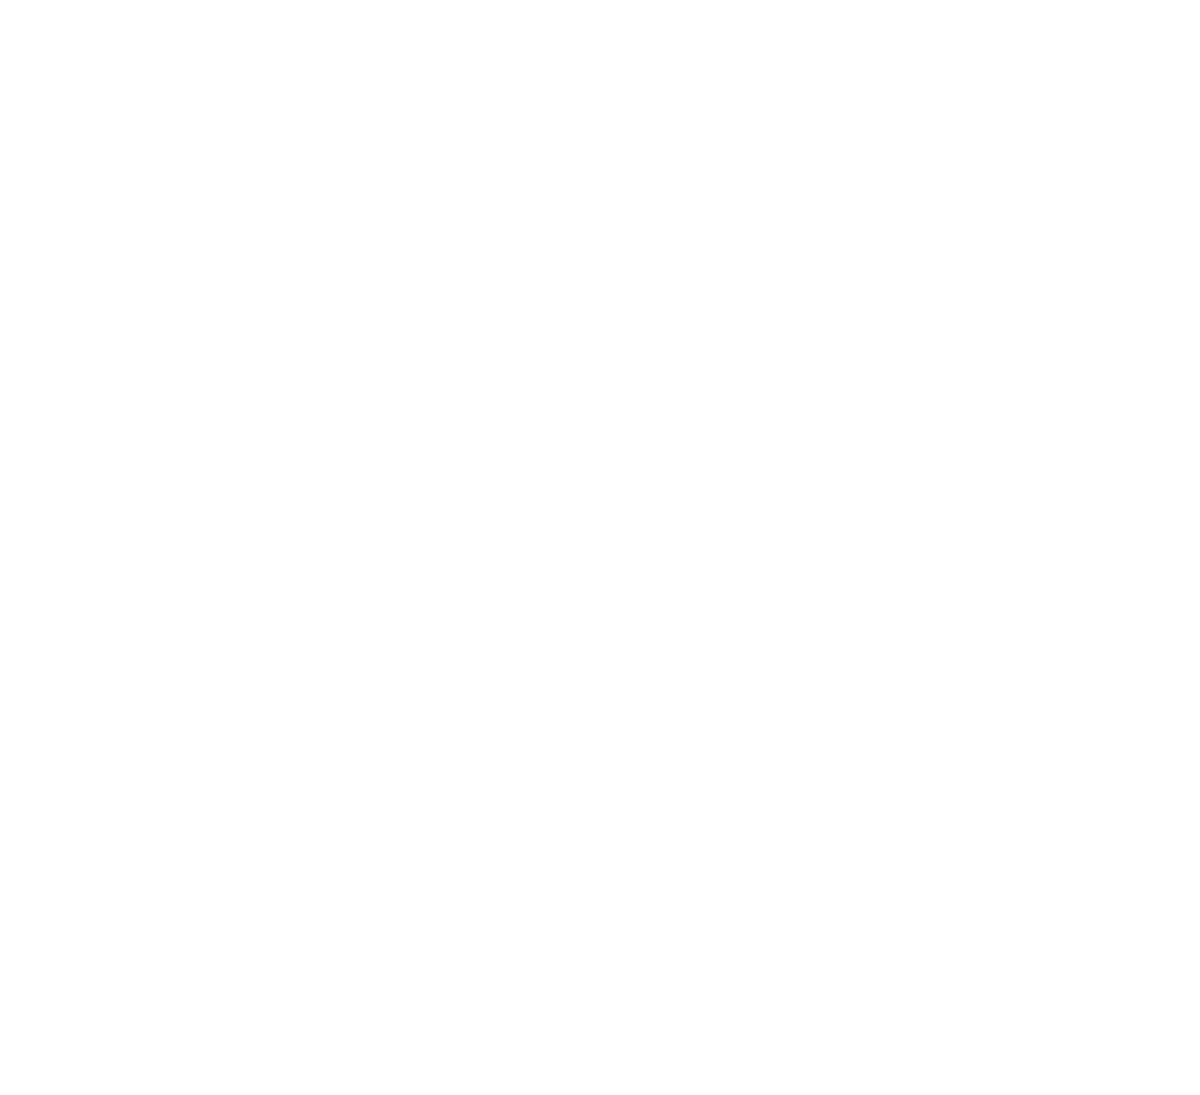 BF Store